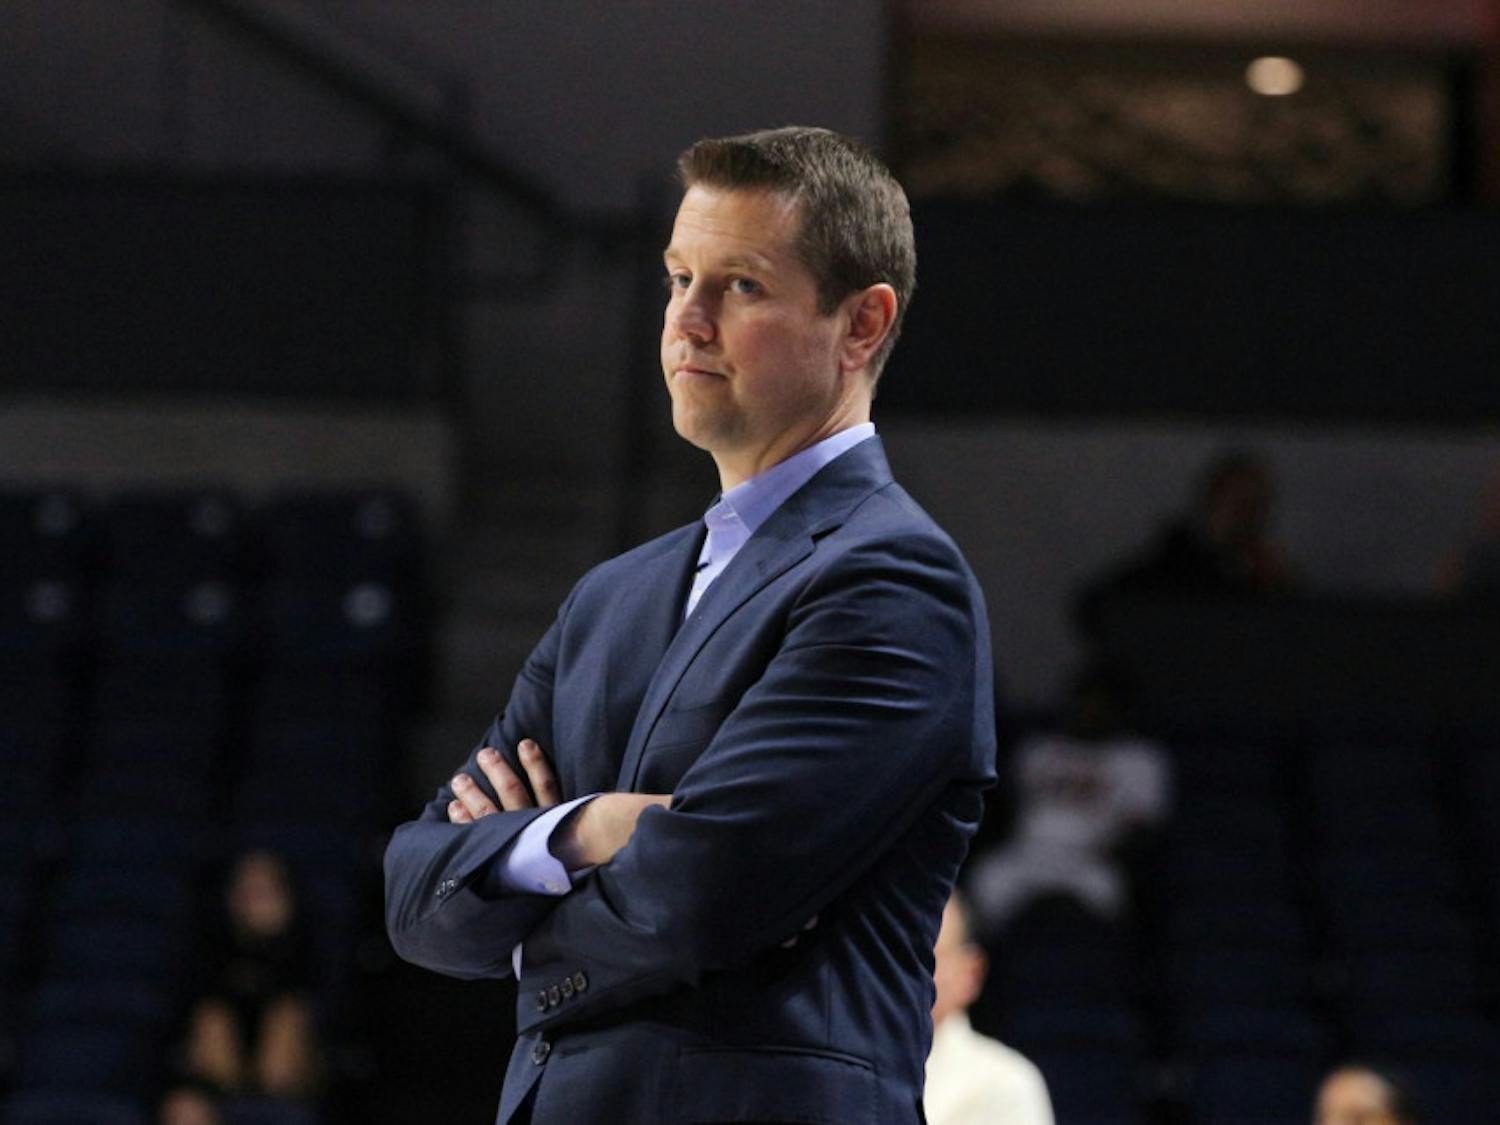 Coach Cameron Newbauer completed his first season with an 11-19 record.&nbsp;